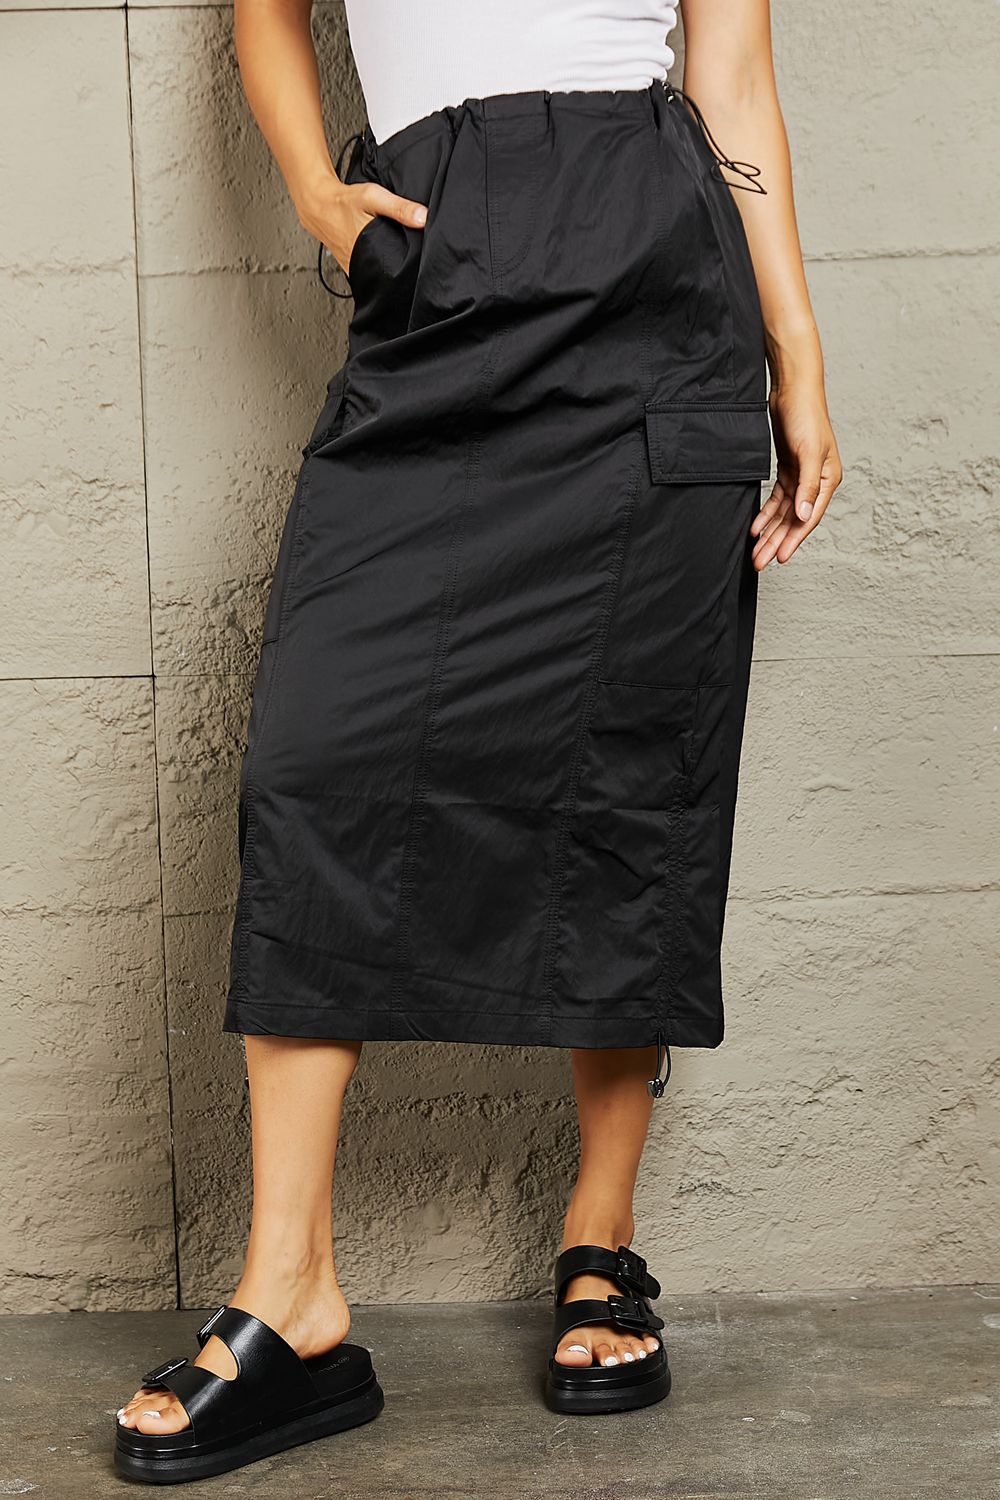 HYFVE Just In Time High Waisted Cargo Midi Skirt in Black